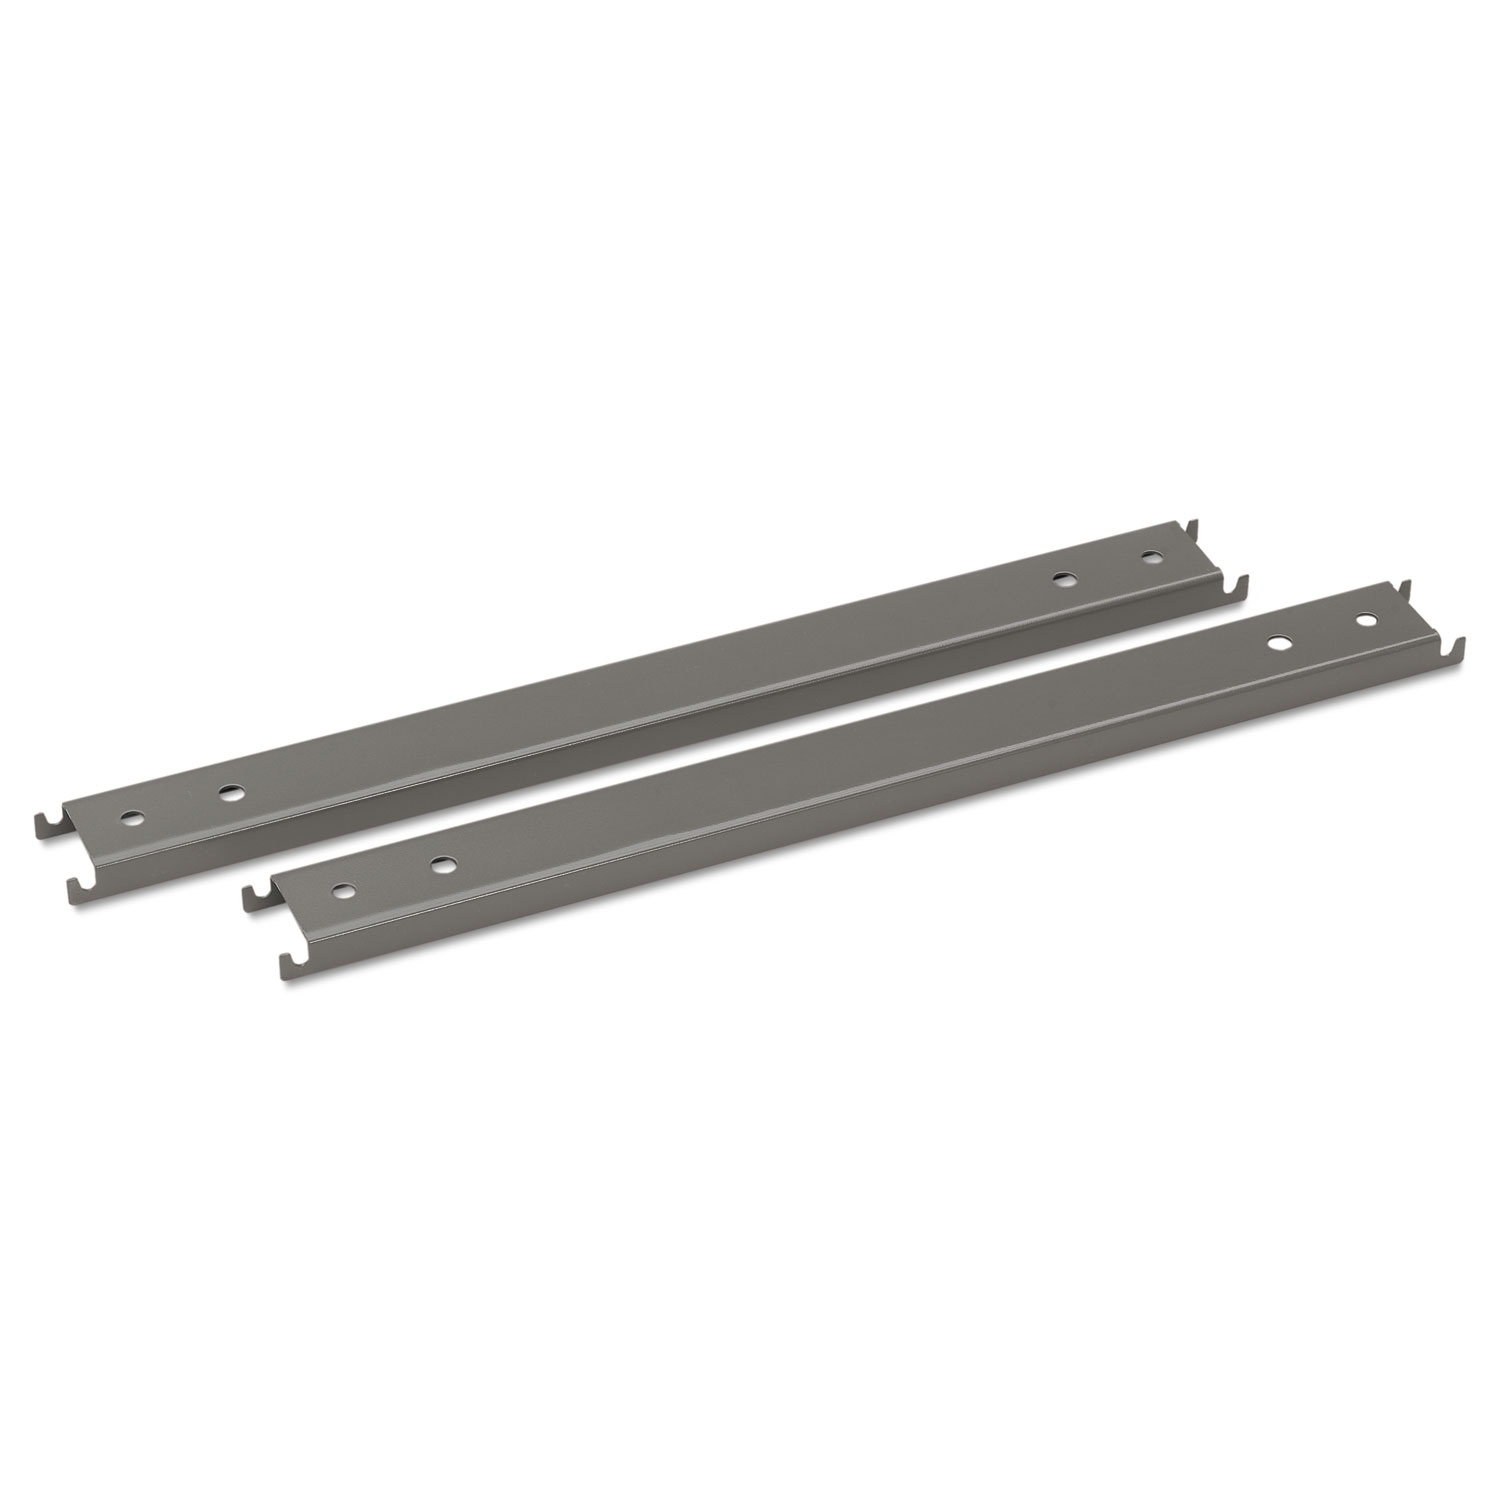  HON H919492 Double Cross Rails for 42 Wide Lateral Files, Gray (HON919492) 